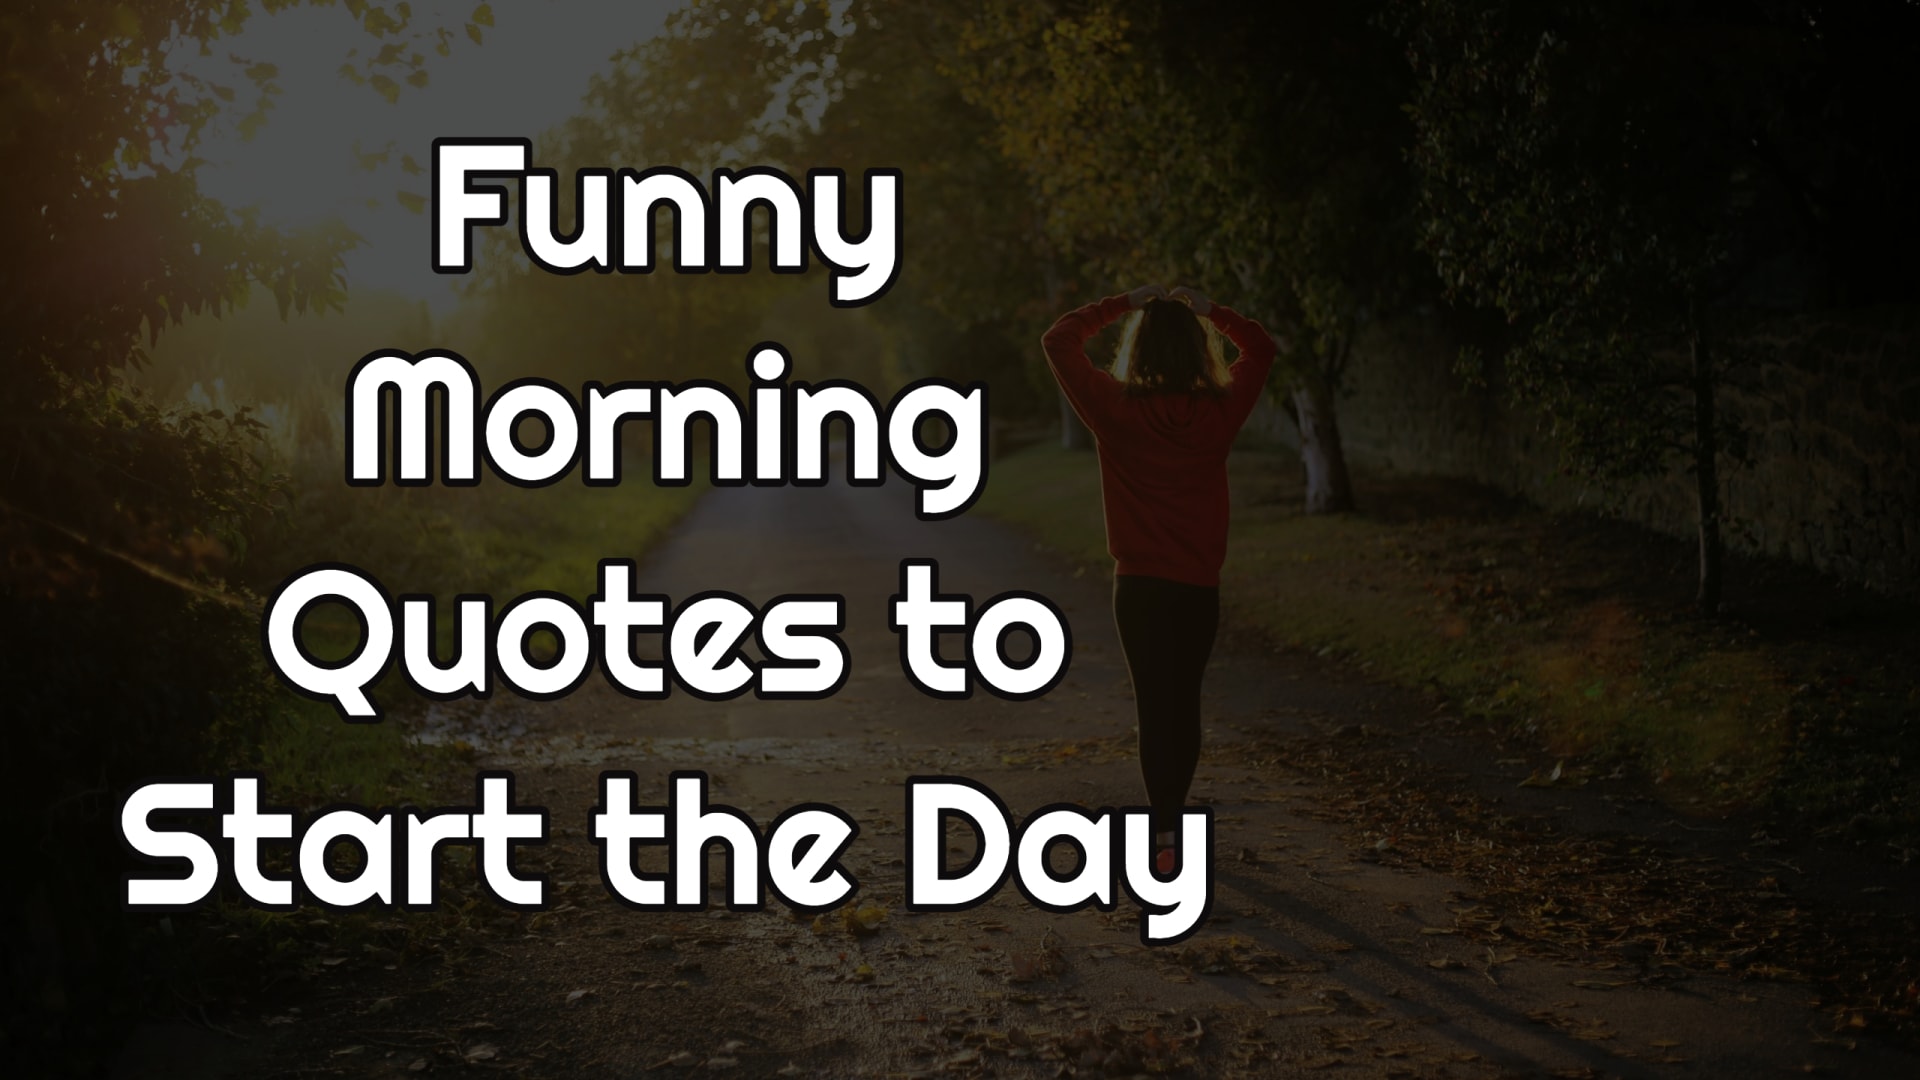 Funny Morning Quotes to Start the Day